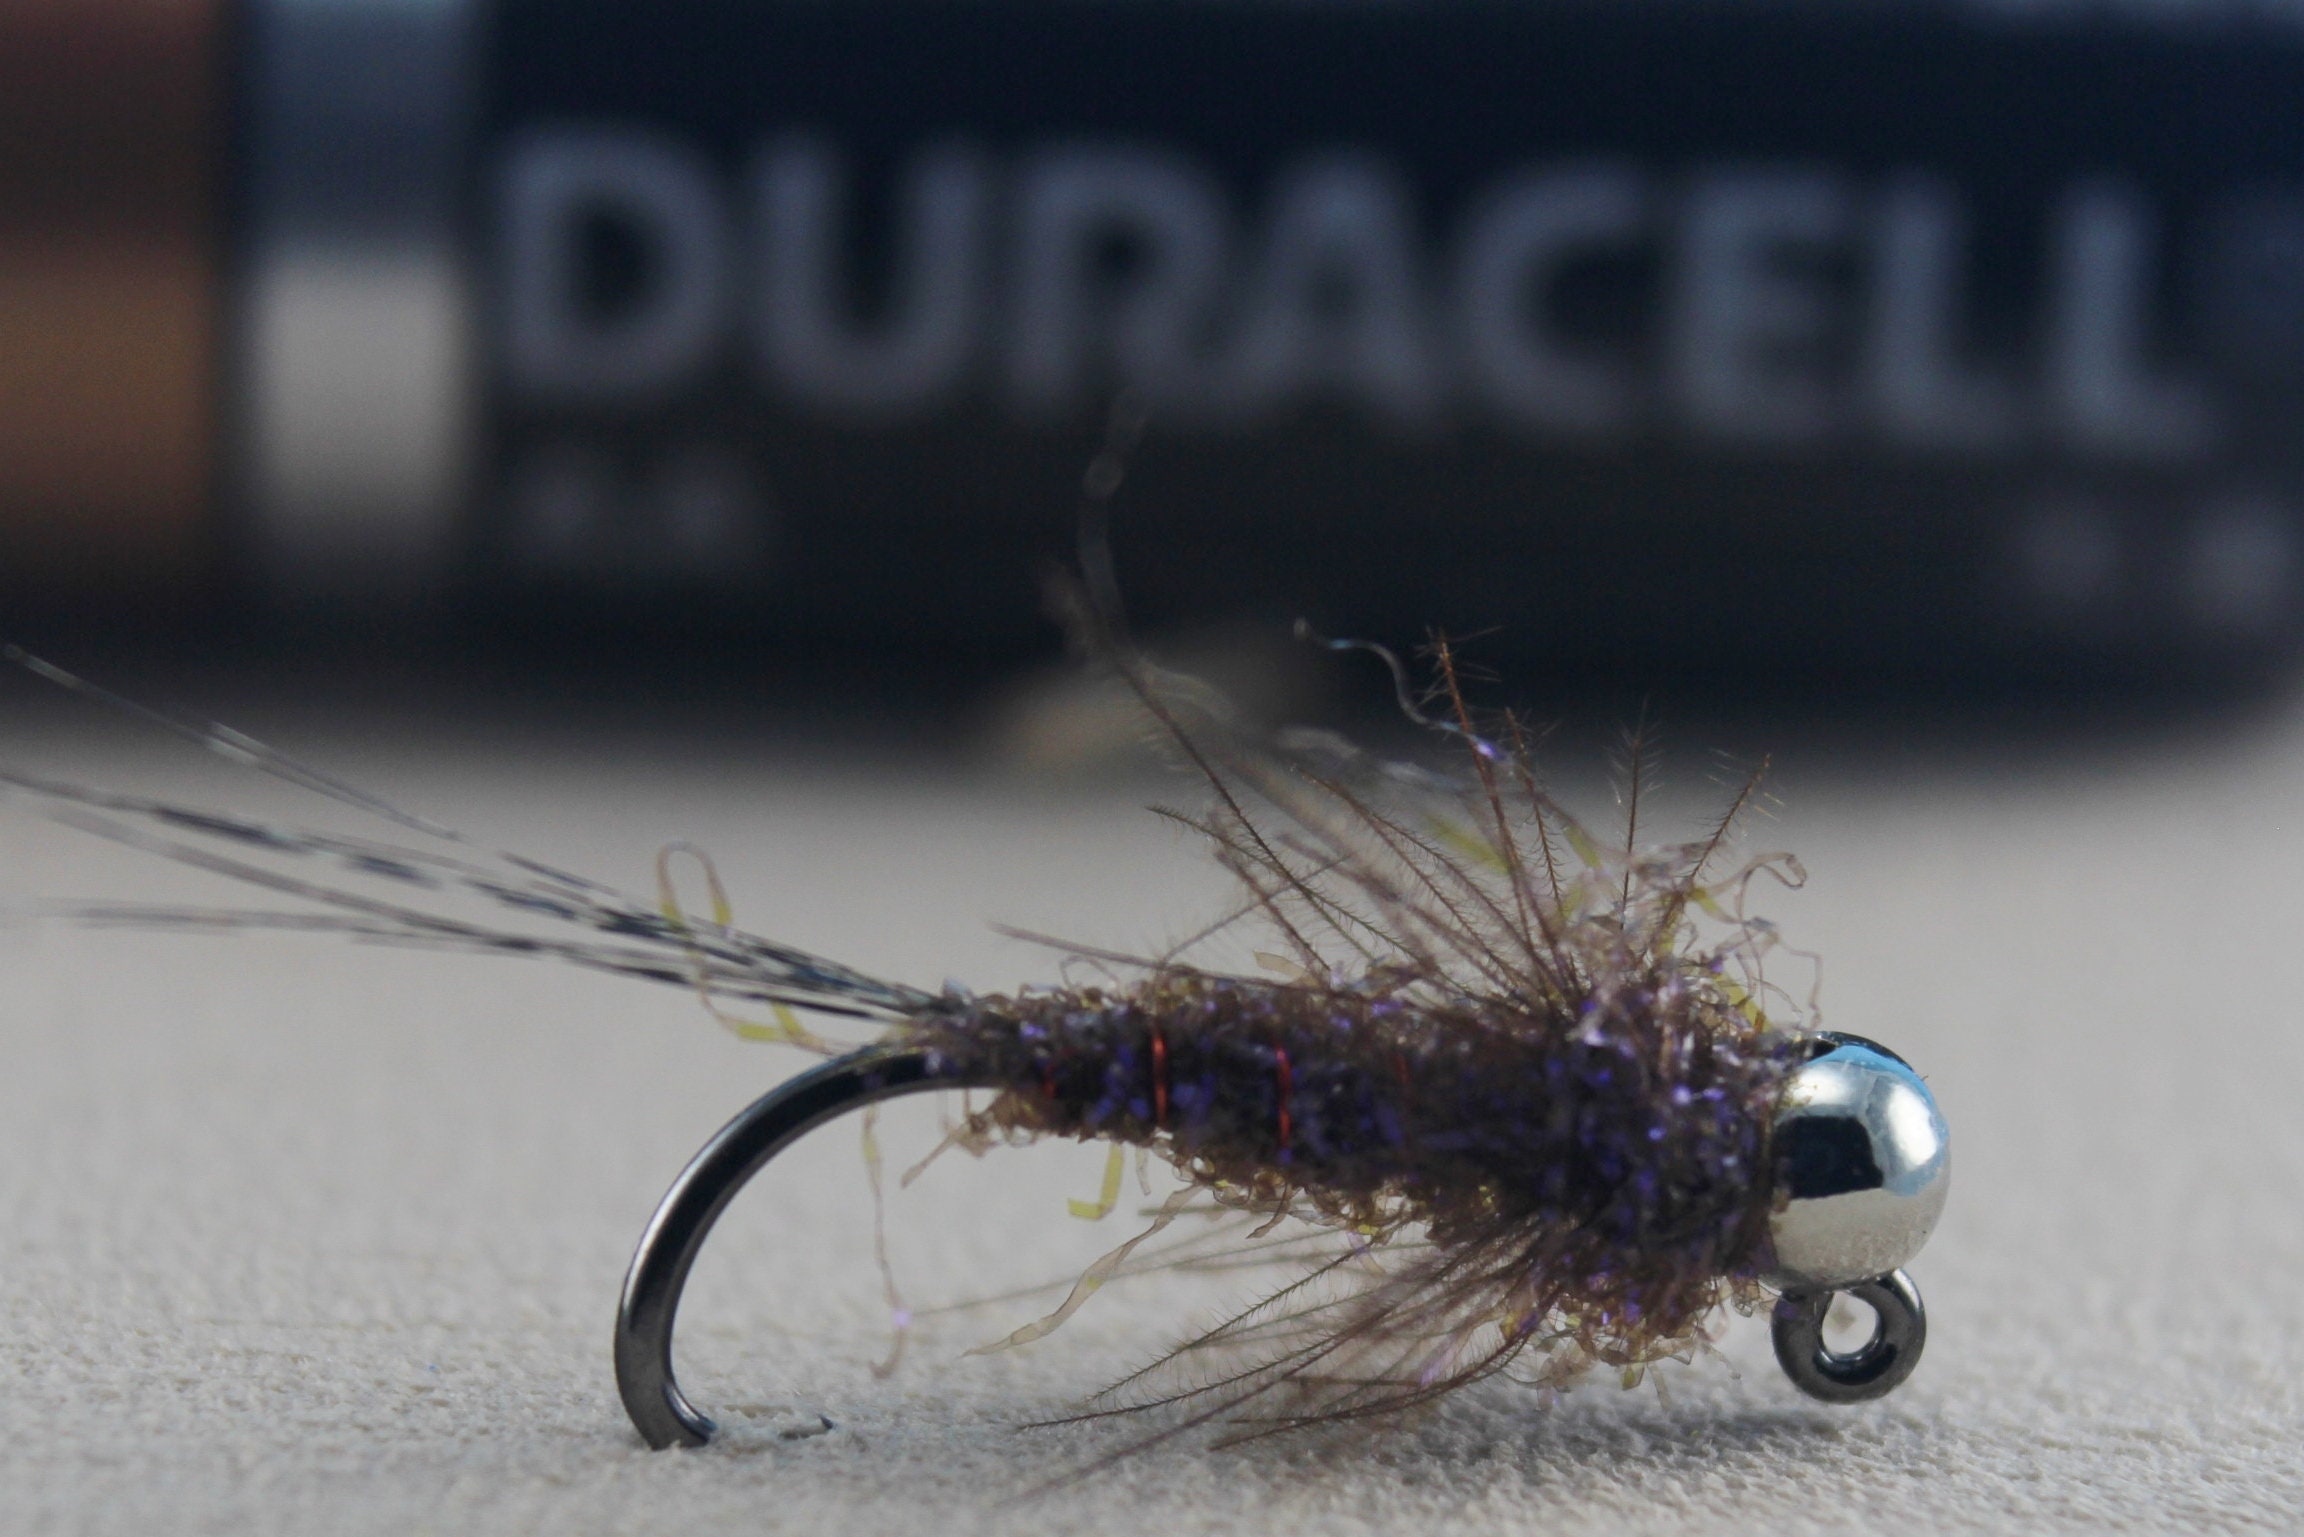 Duracell Jig Fly, 3 Pack Nymph Flies, Barbless Fly, Hand Tied Flies